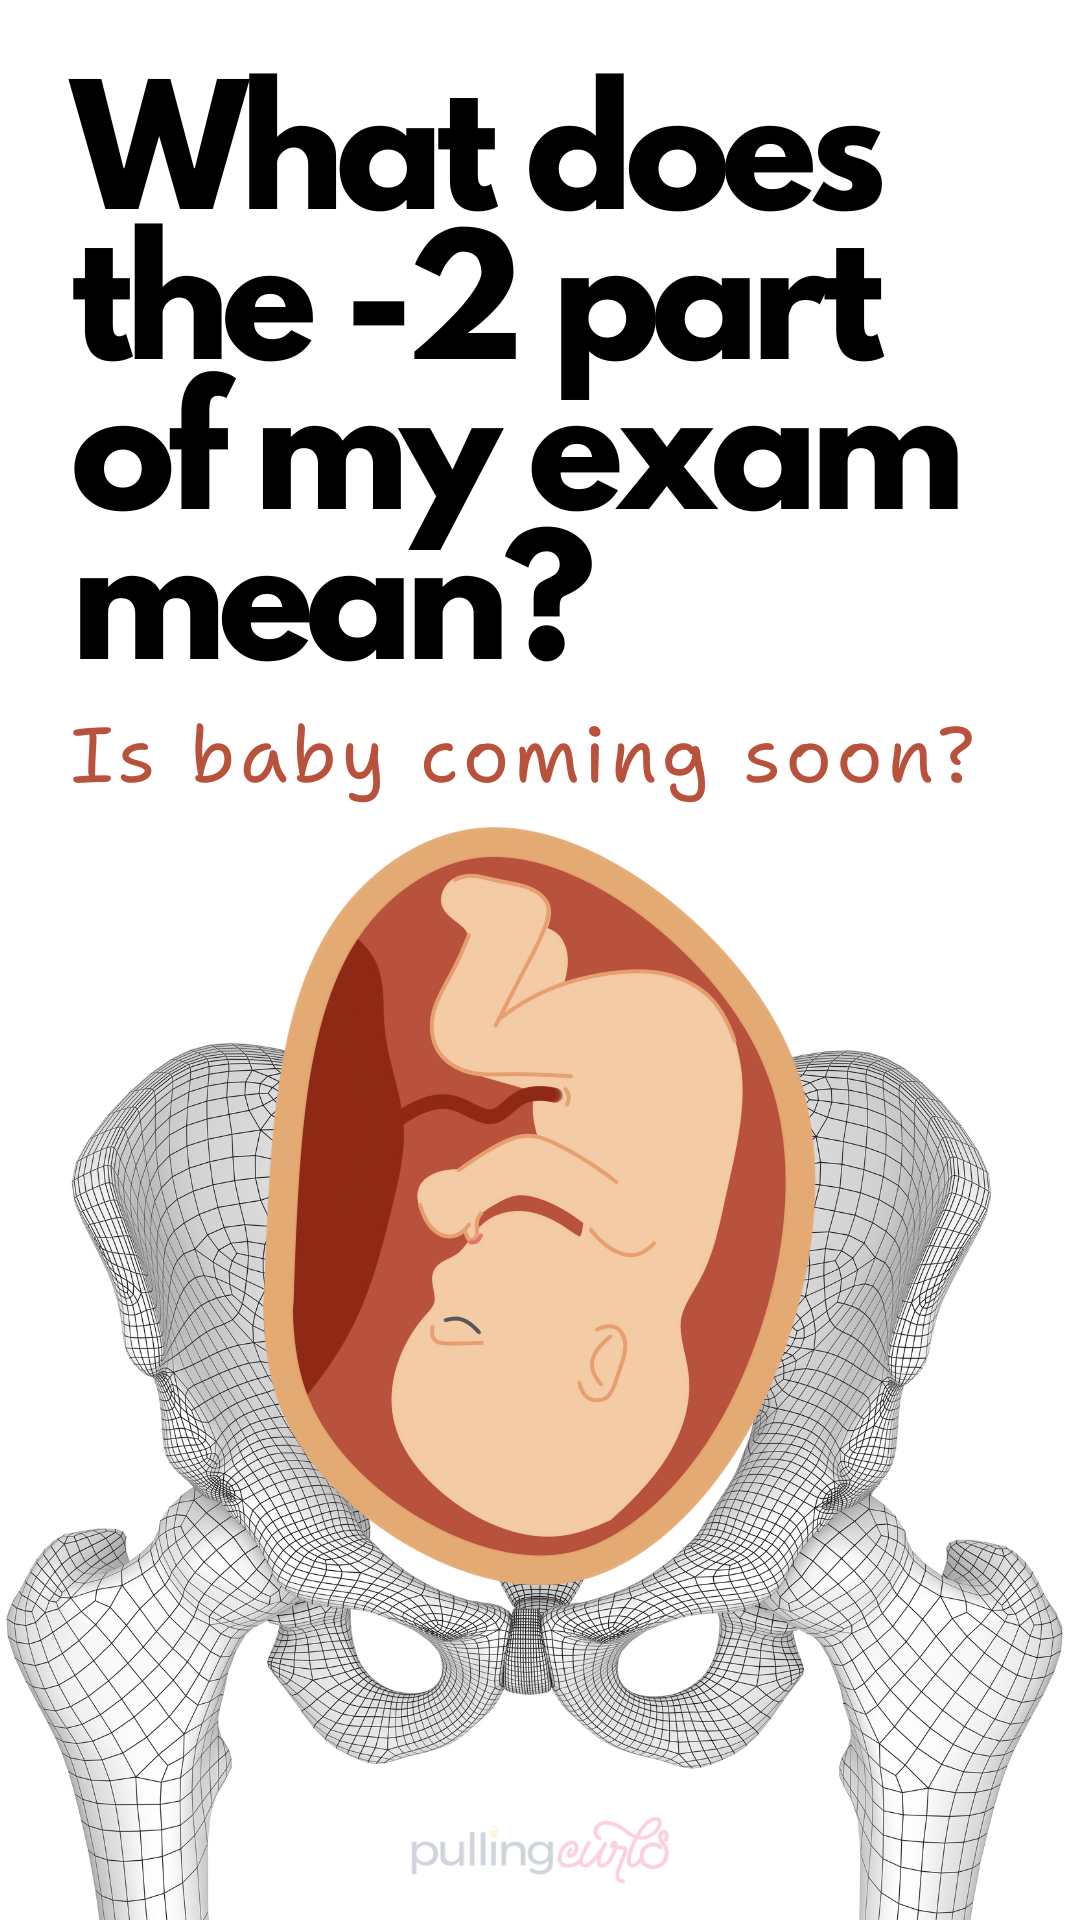 Baby in pelvis / what does the -2 part of my exam mean -- is baby coming soon? via @pullingcurls